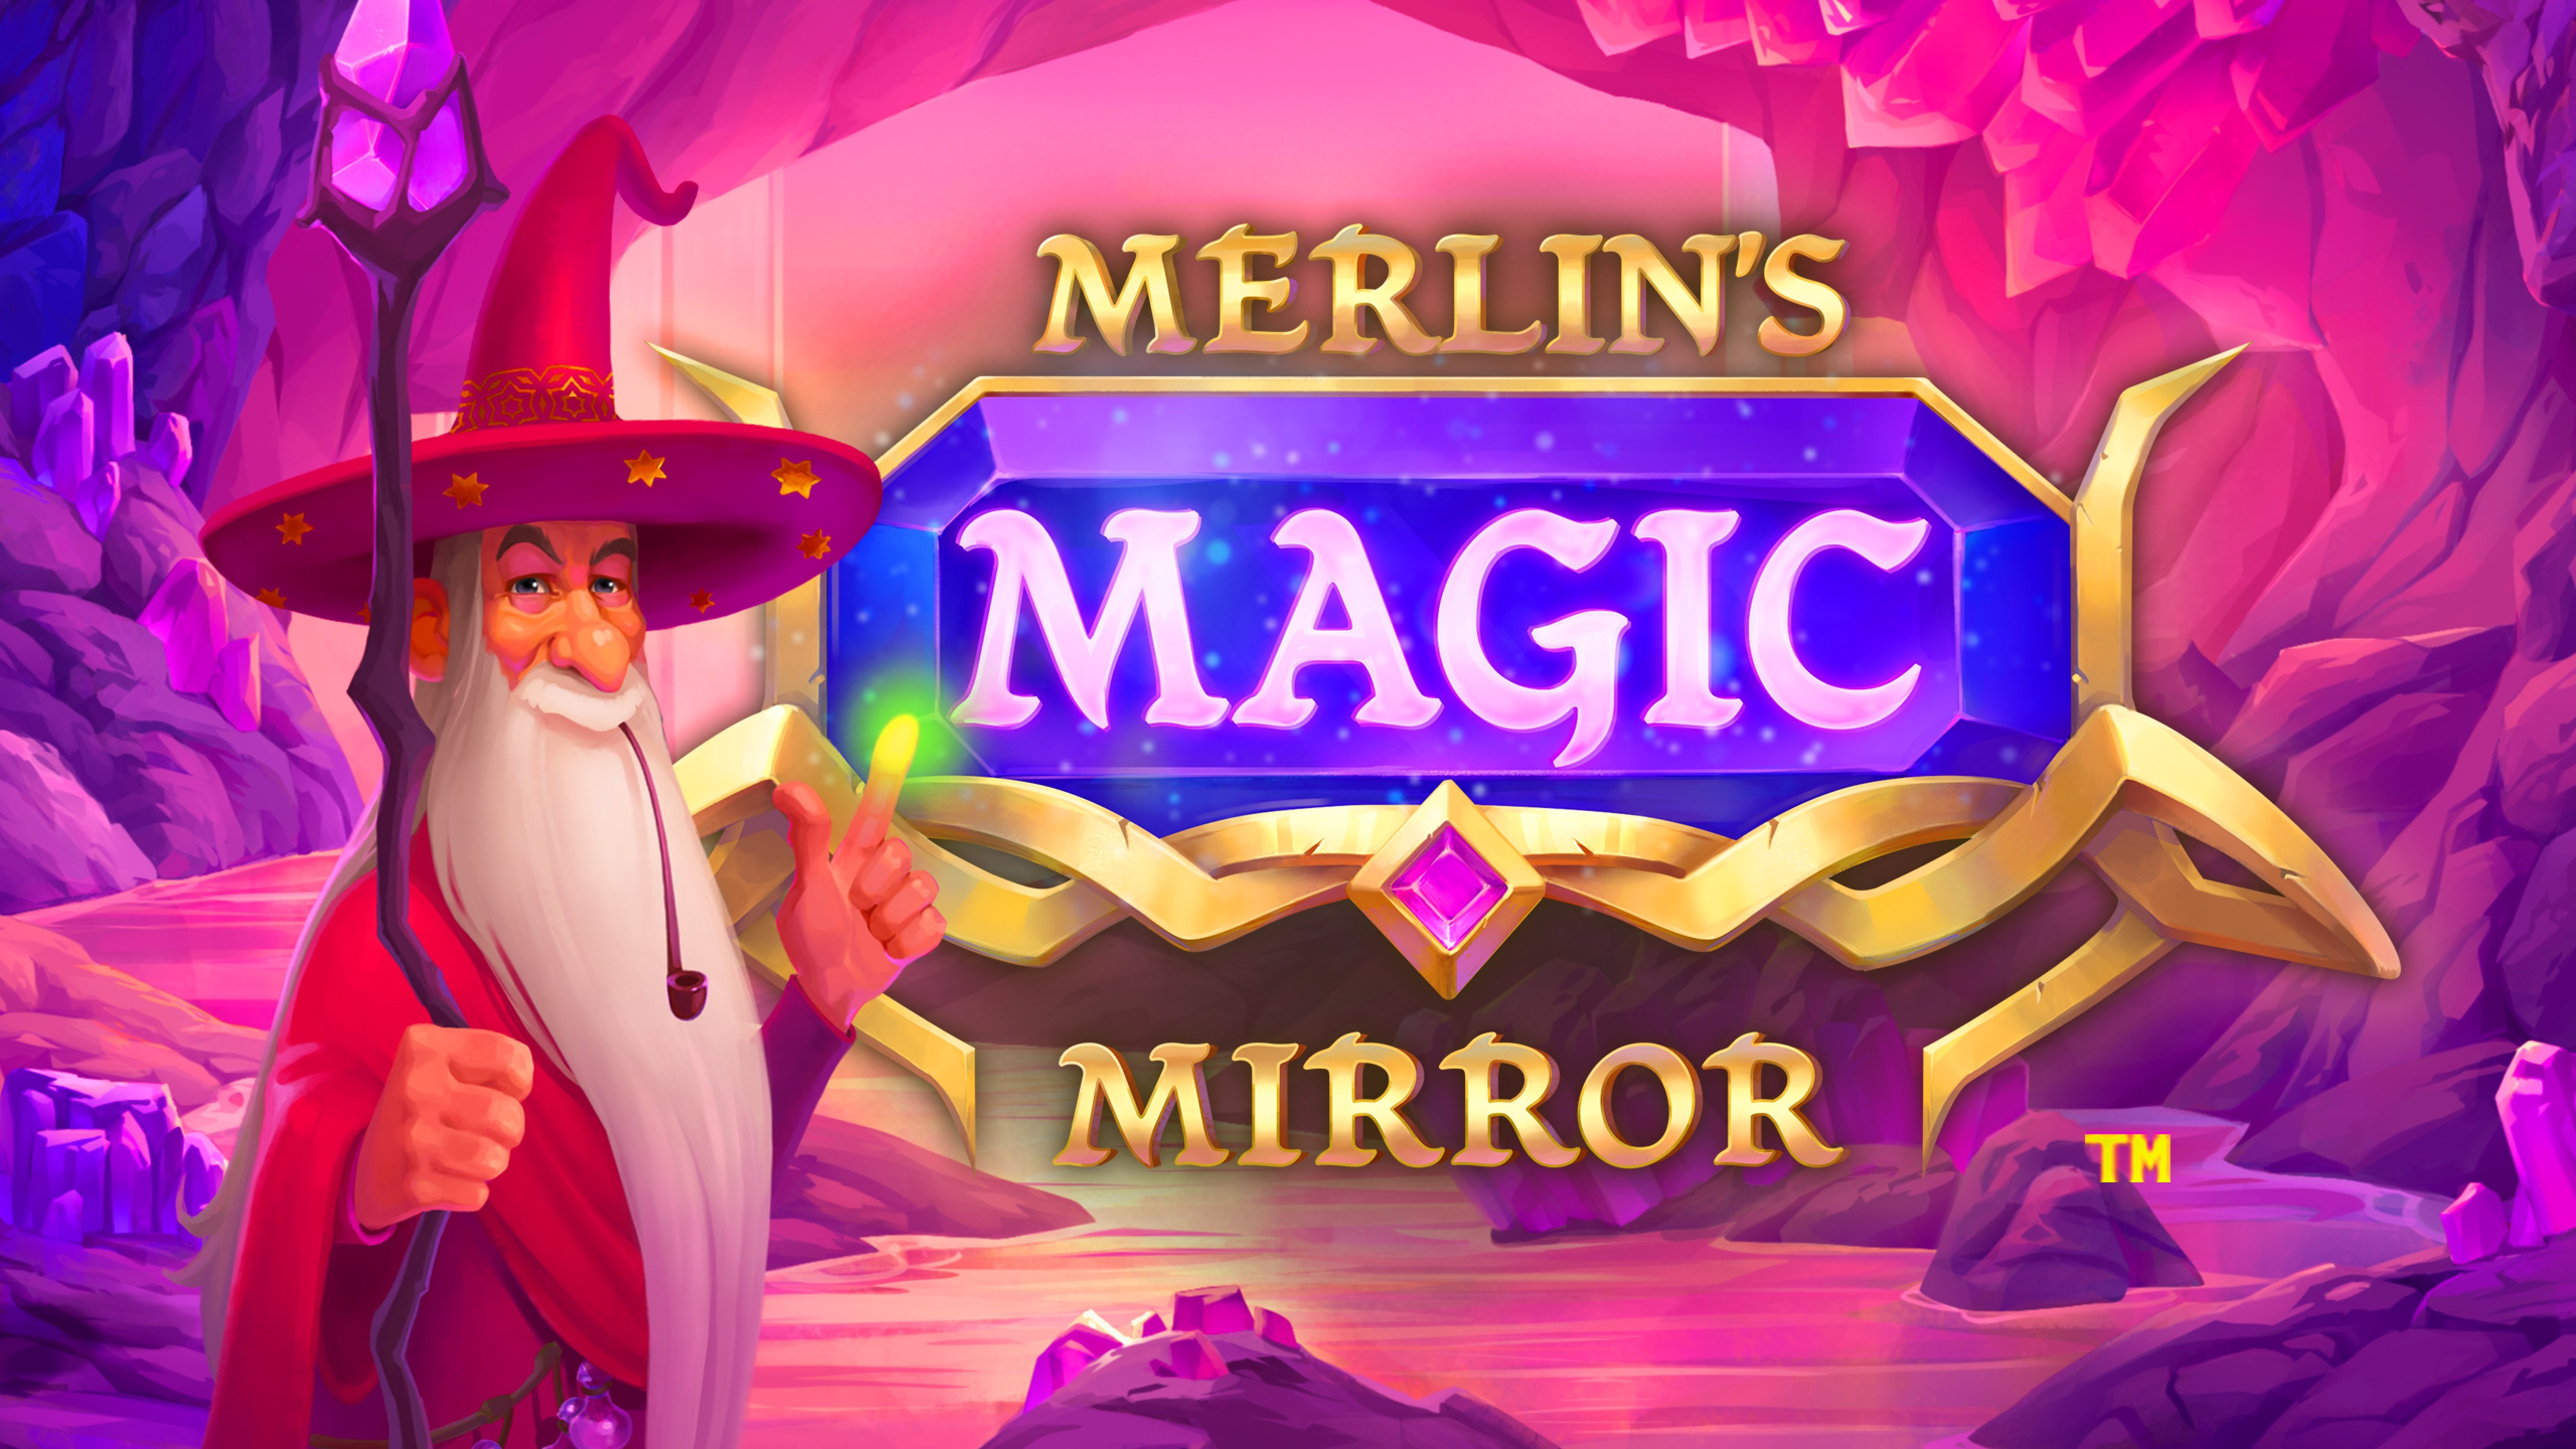 The Merlin's Magic Mirror Online Slot Demo Game by iSoftBet